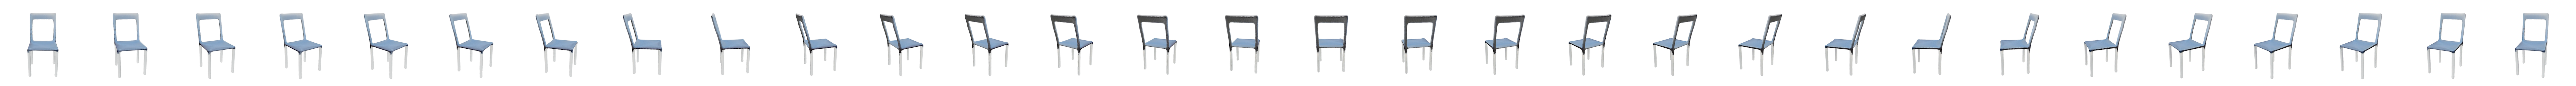 chairs_ours_2_2